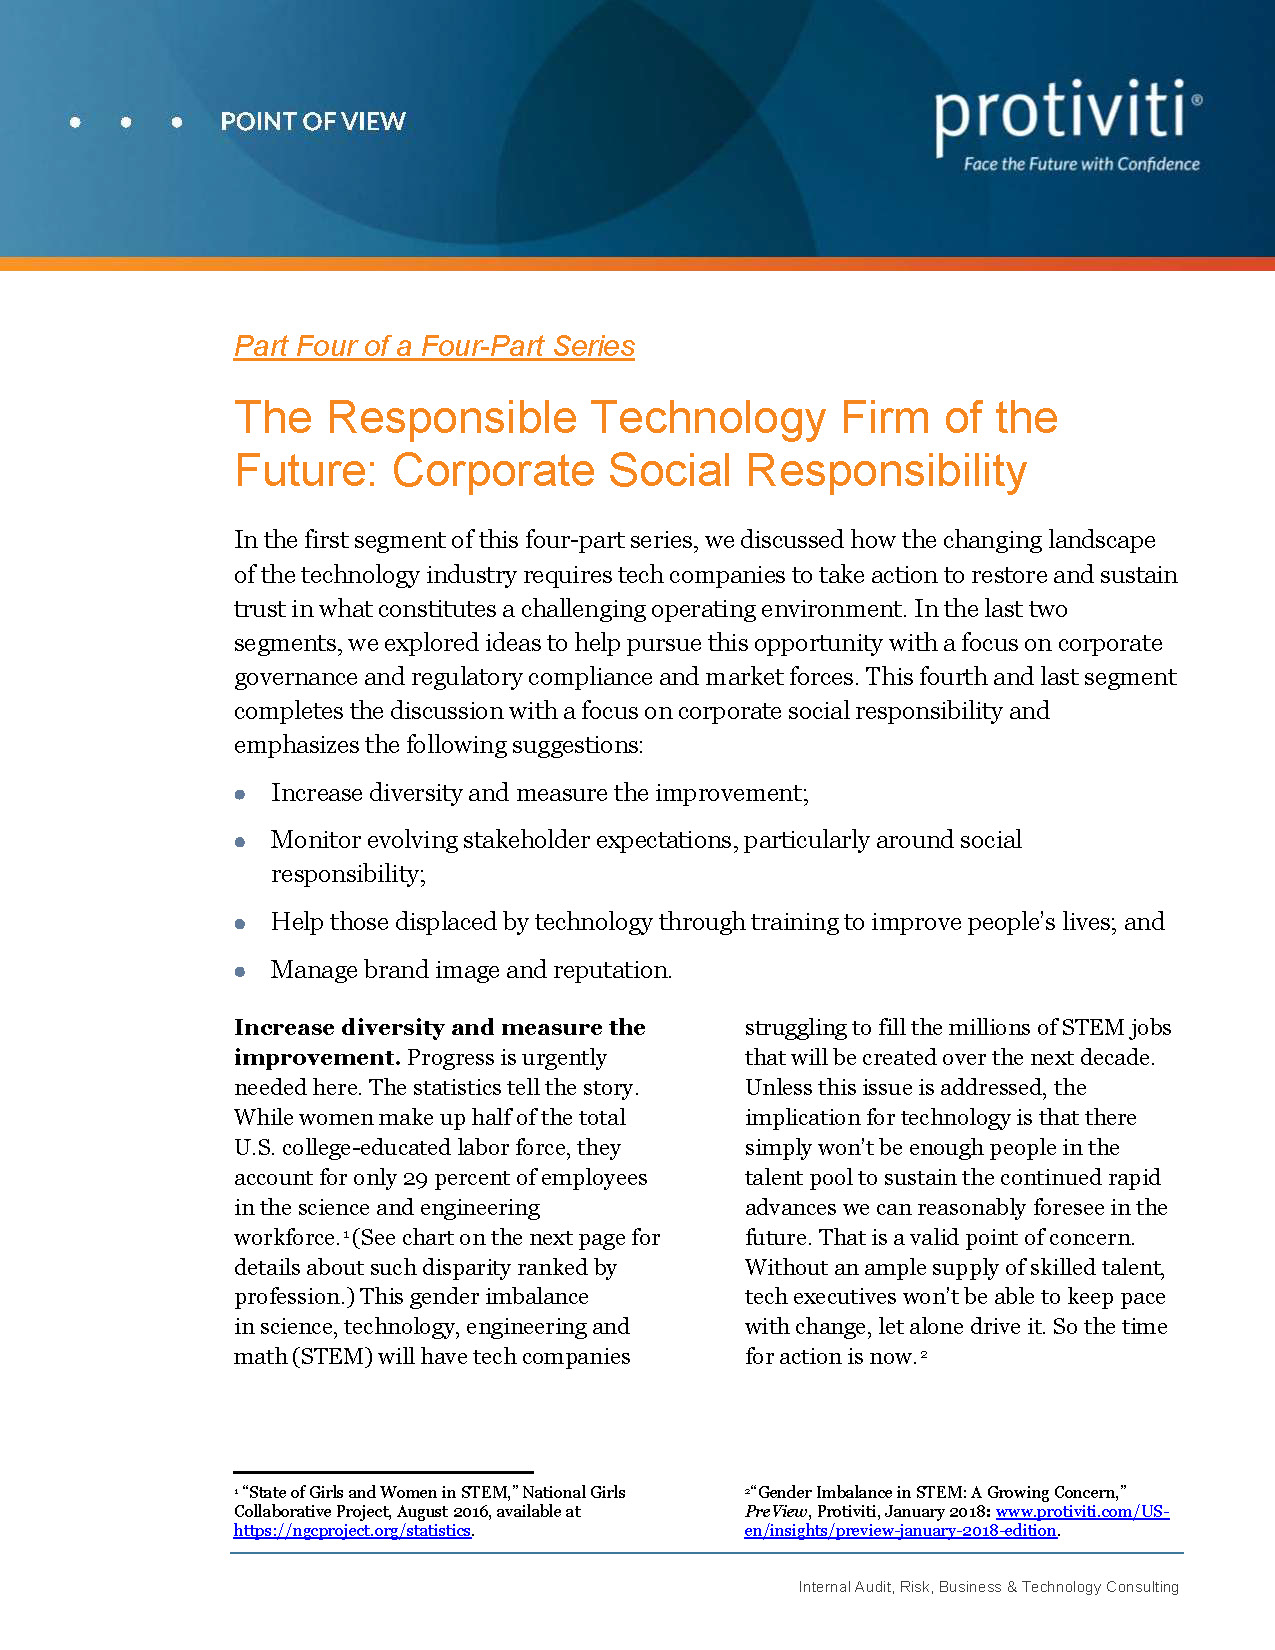 Screenshot of the first page of The Responsible Tech Firm Series Part 4 Corporate Social Responsibility